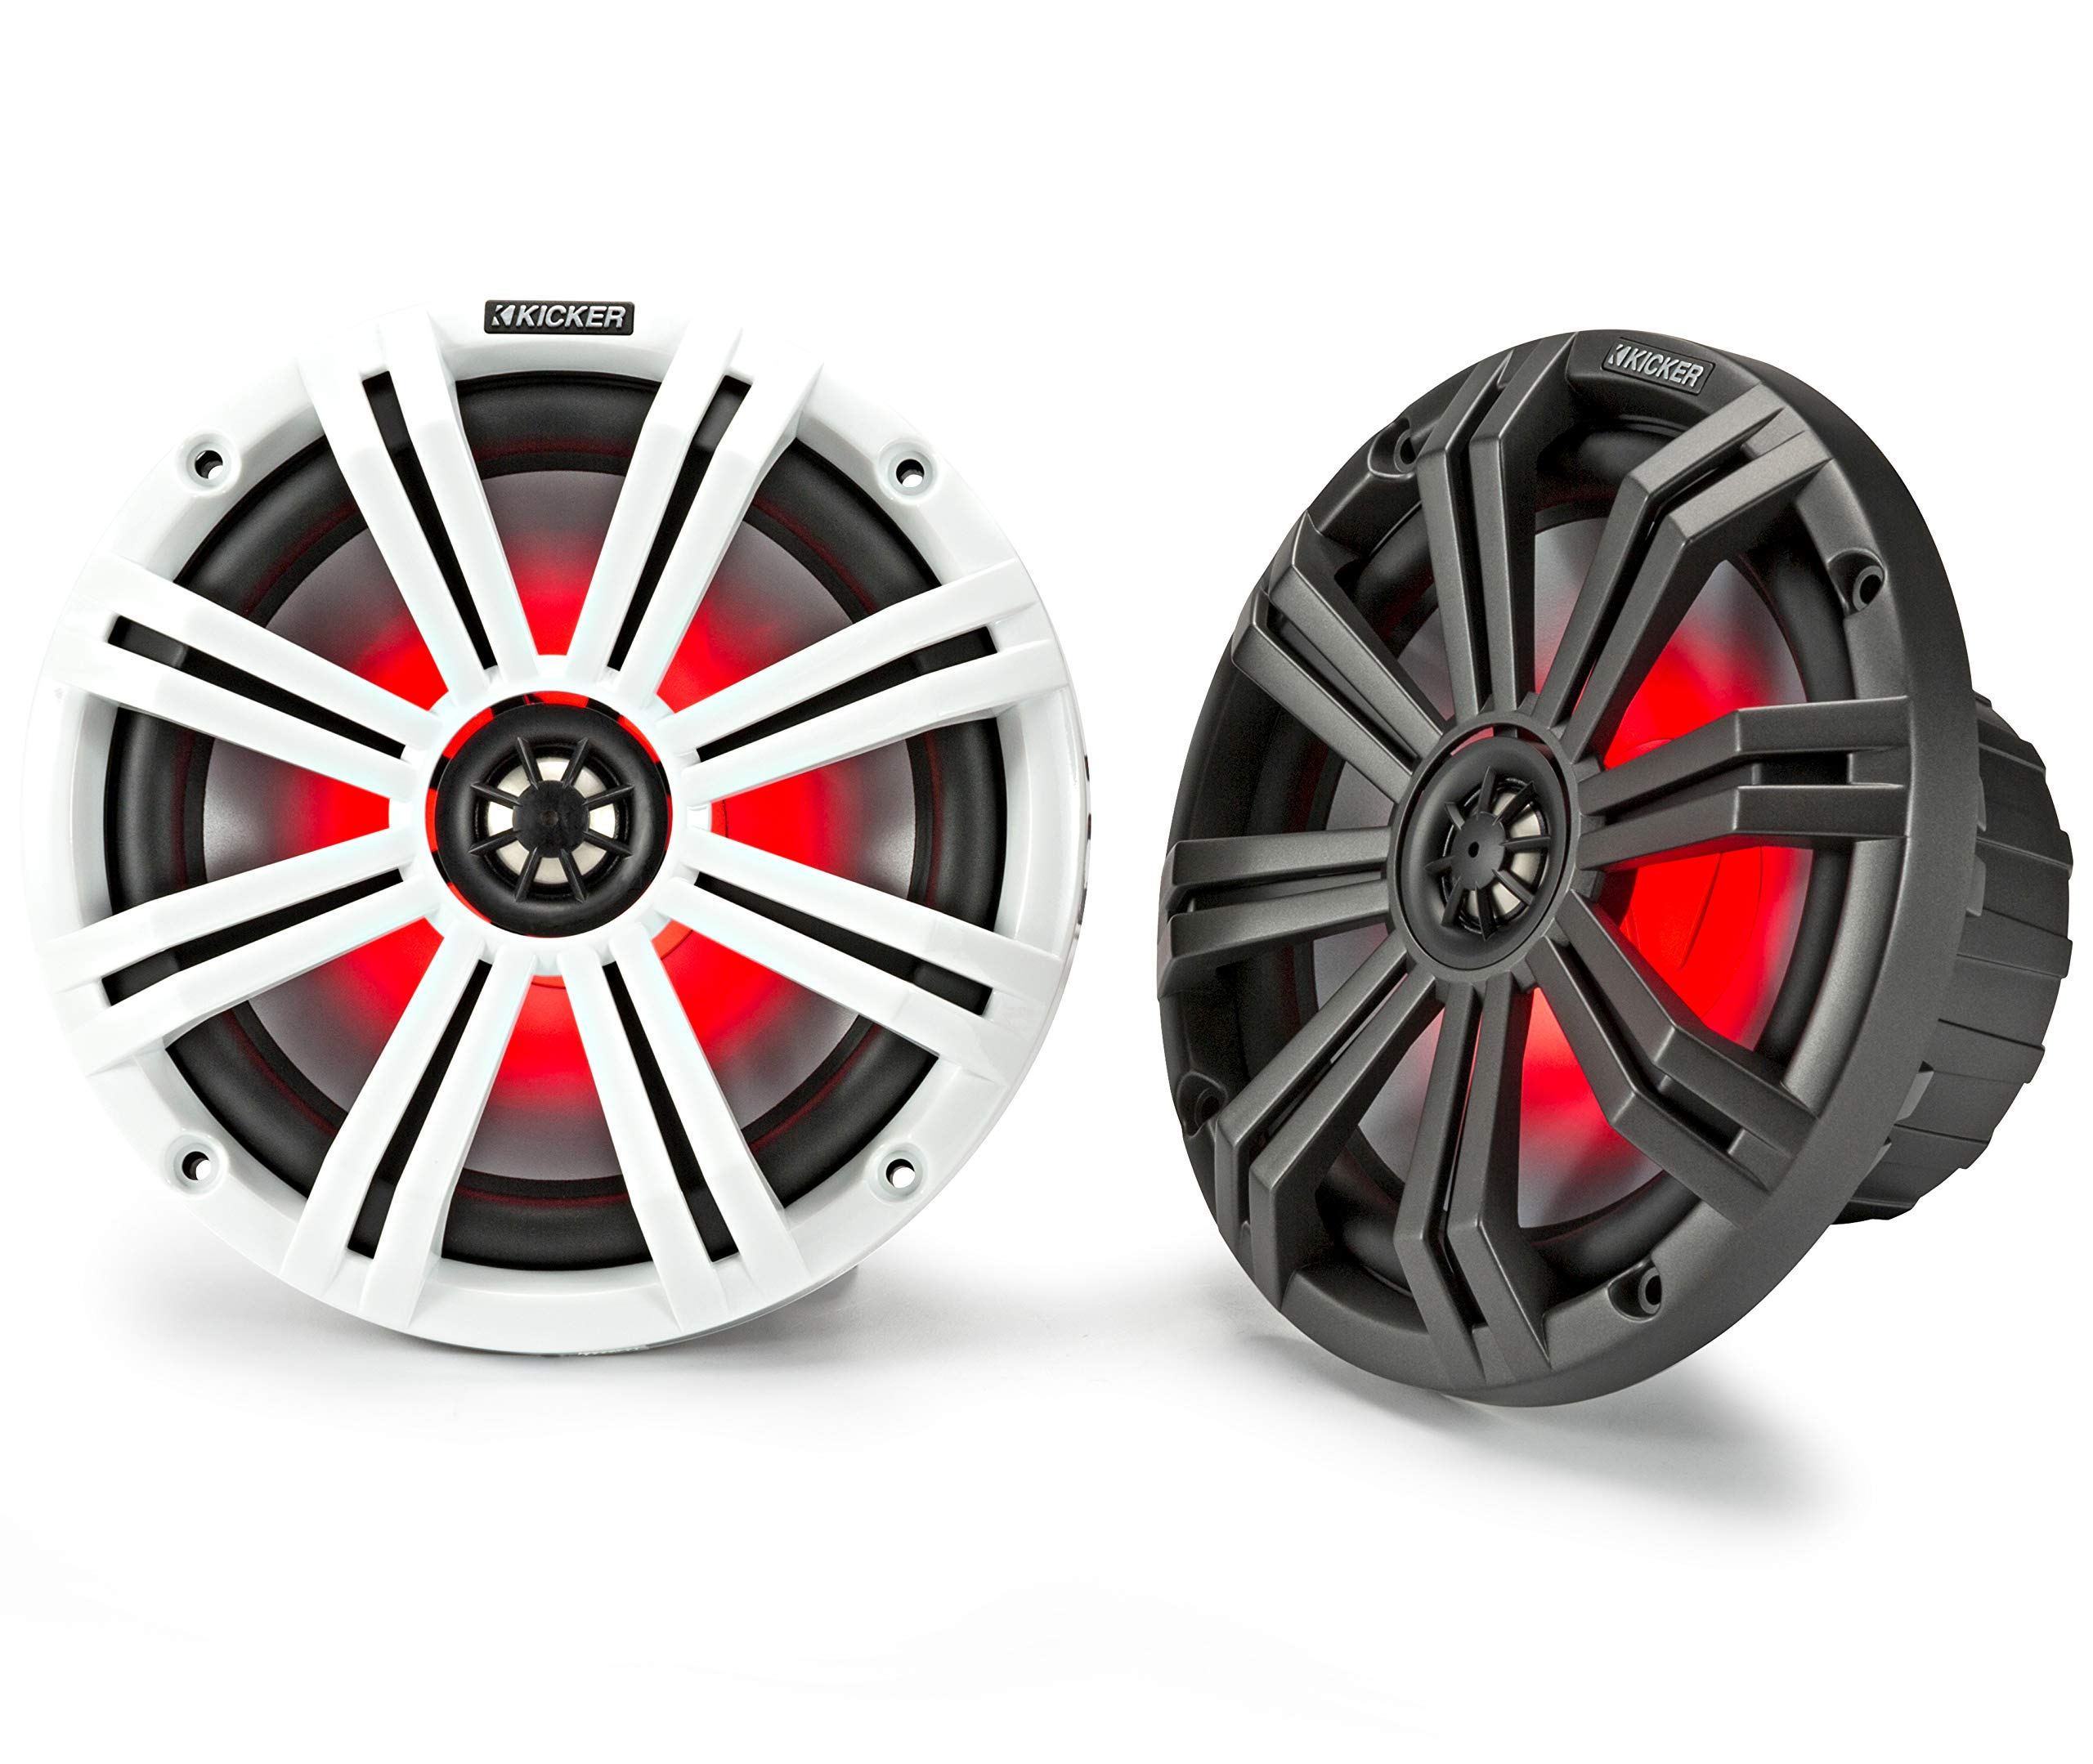 Kicker 45KM84L 8-Inch Marine Coaxial Boat Speakers, Black and White Grilles, Red LED Lights, 4-Ohm, 300 Max Watts, Pair